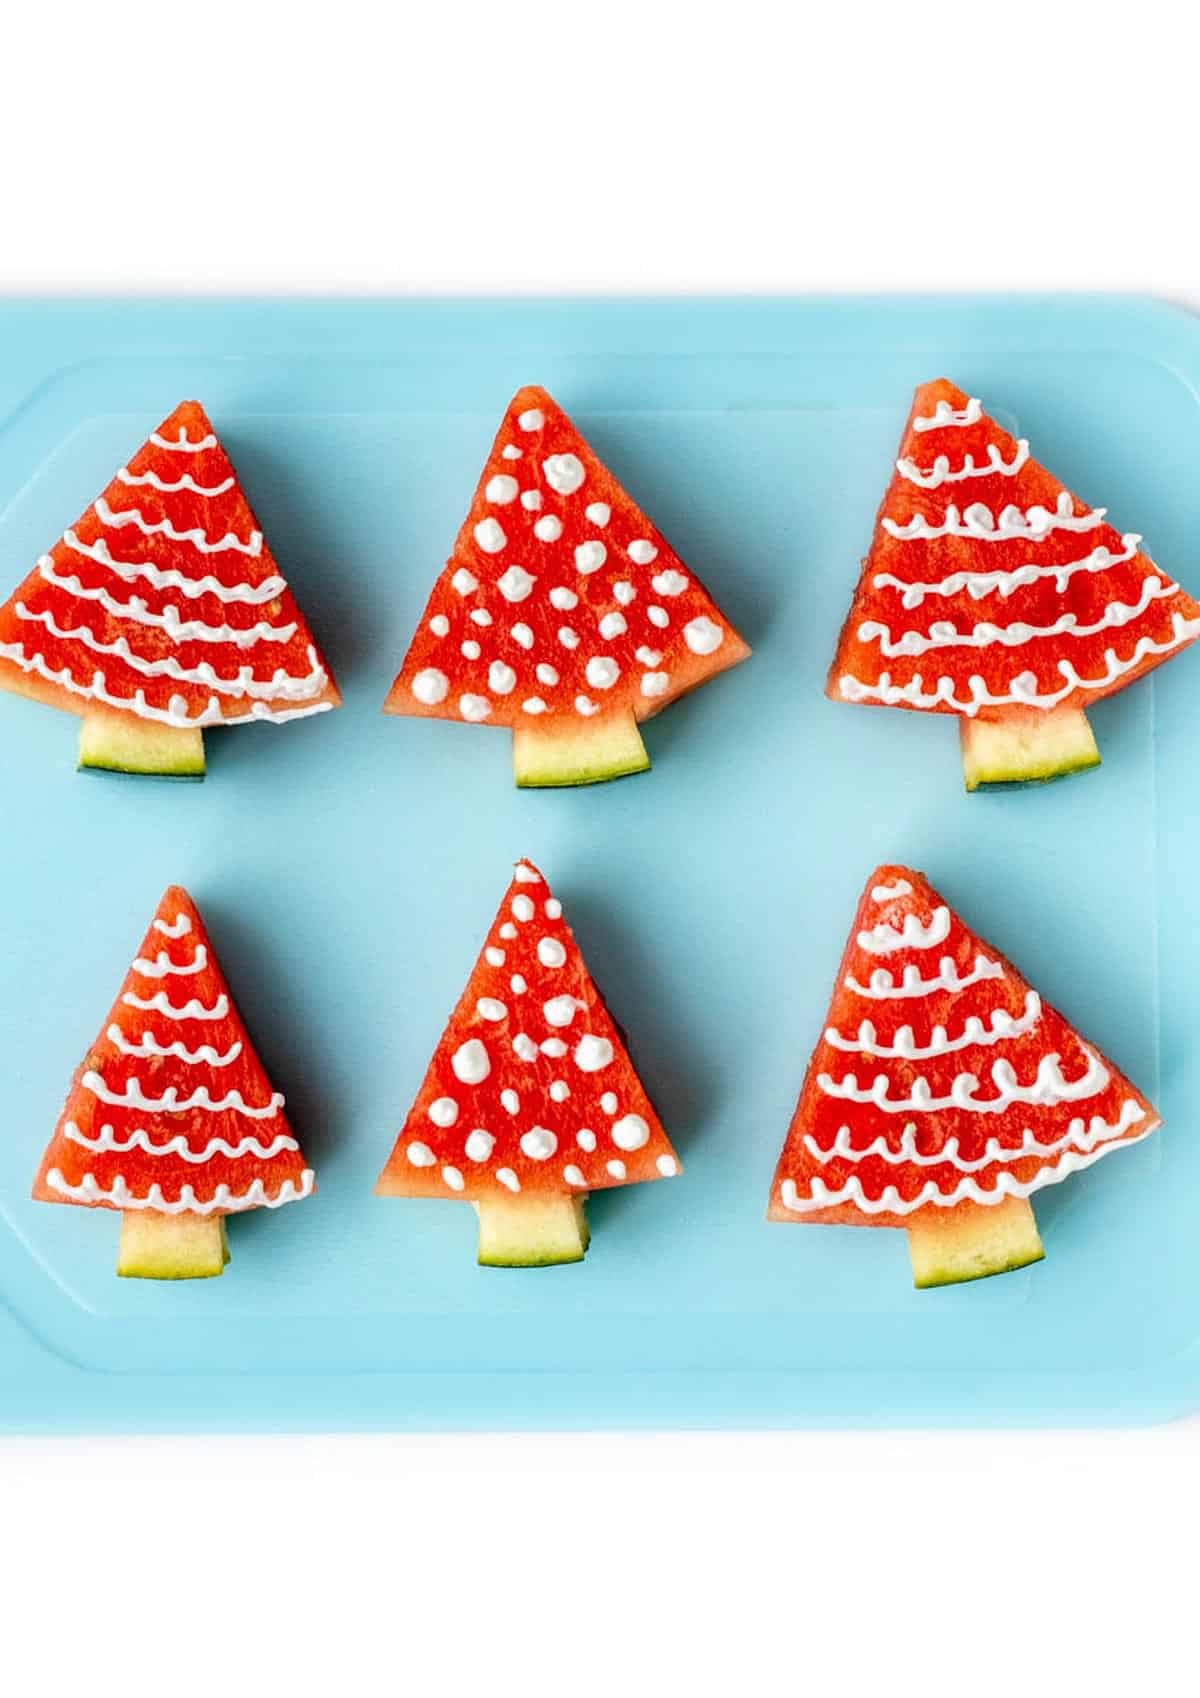 Decorated watermelon Christmas trees on a blue cutting board.